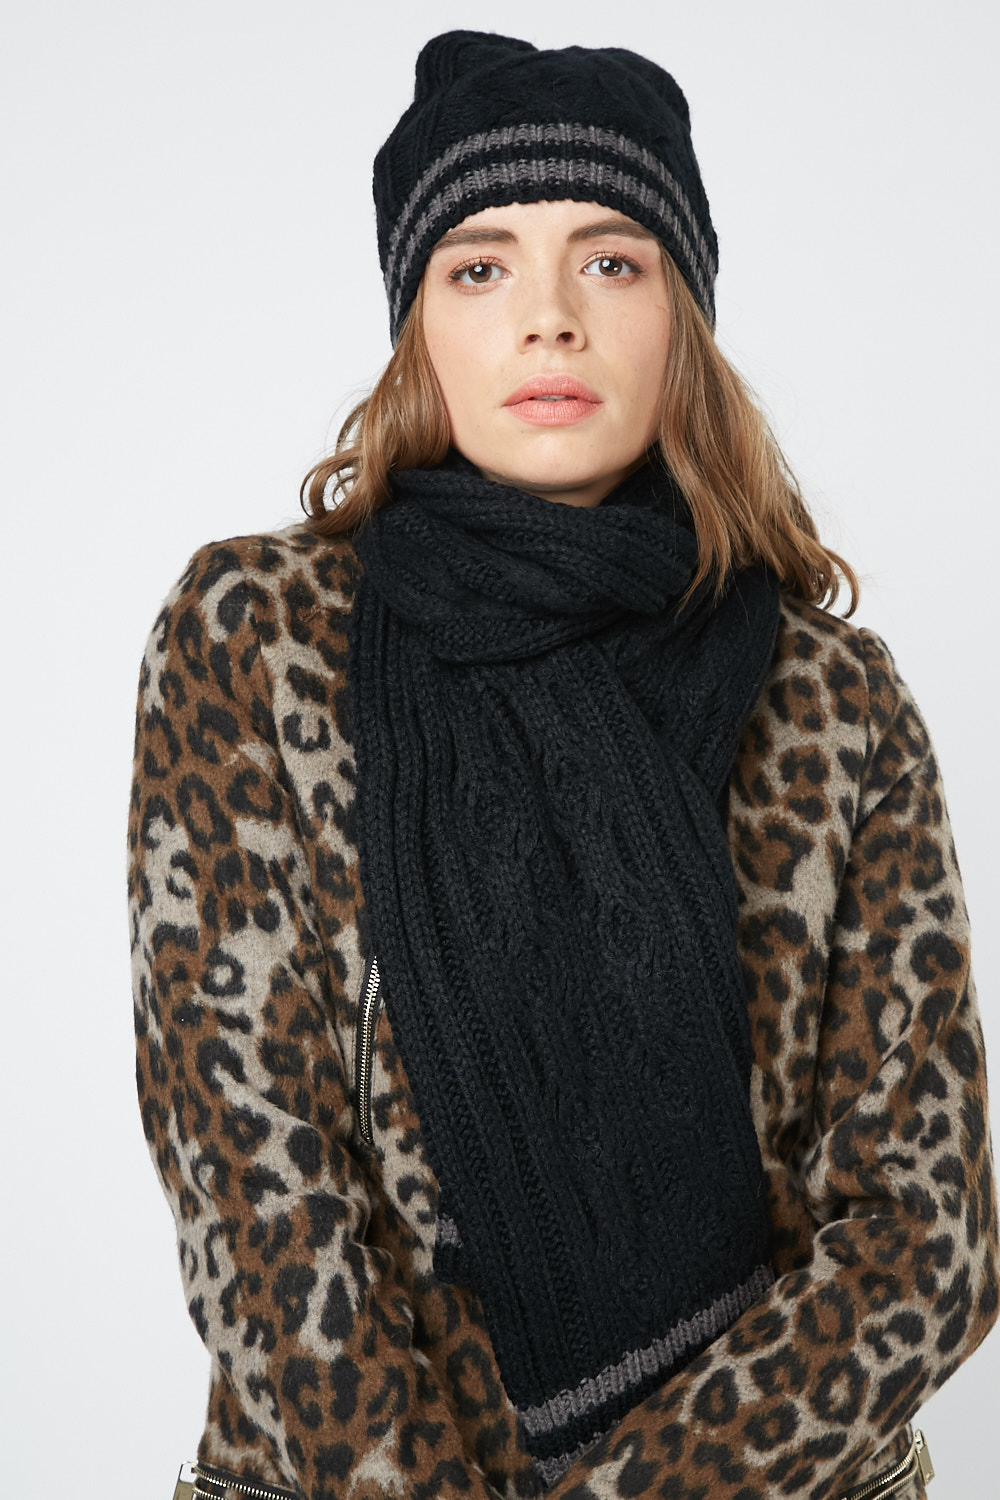 Cable Knit Beanie Hat And Scarf Set - Just $7